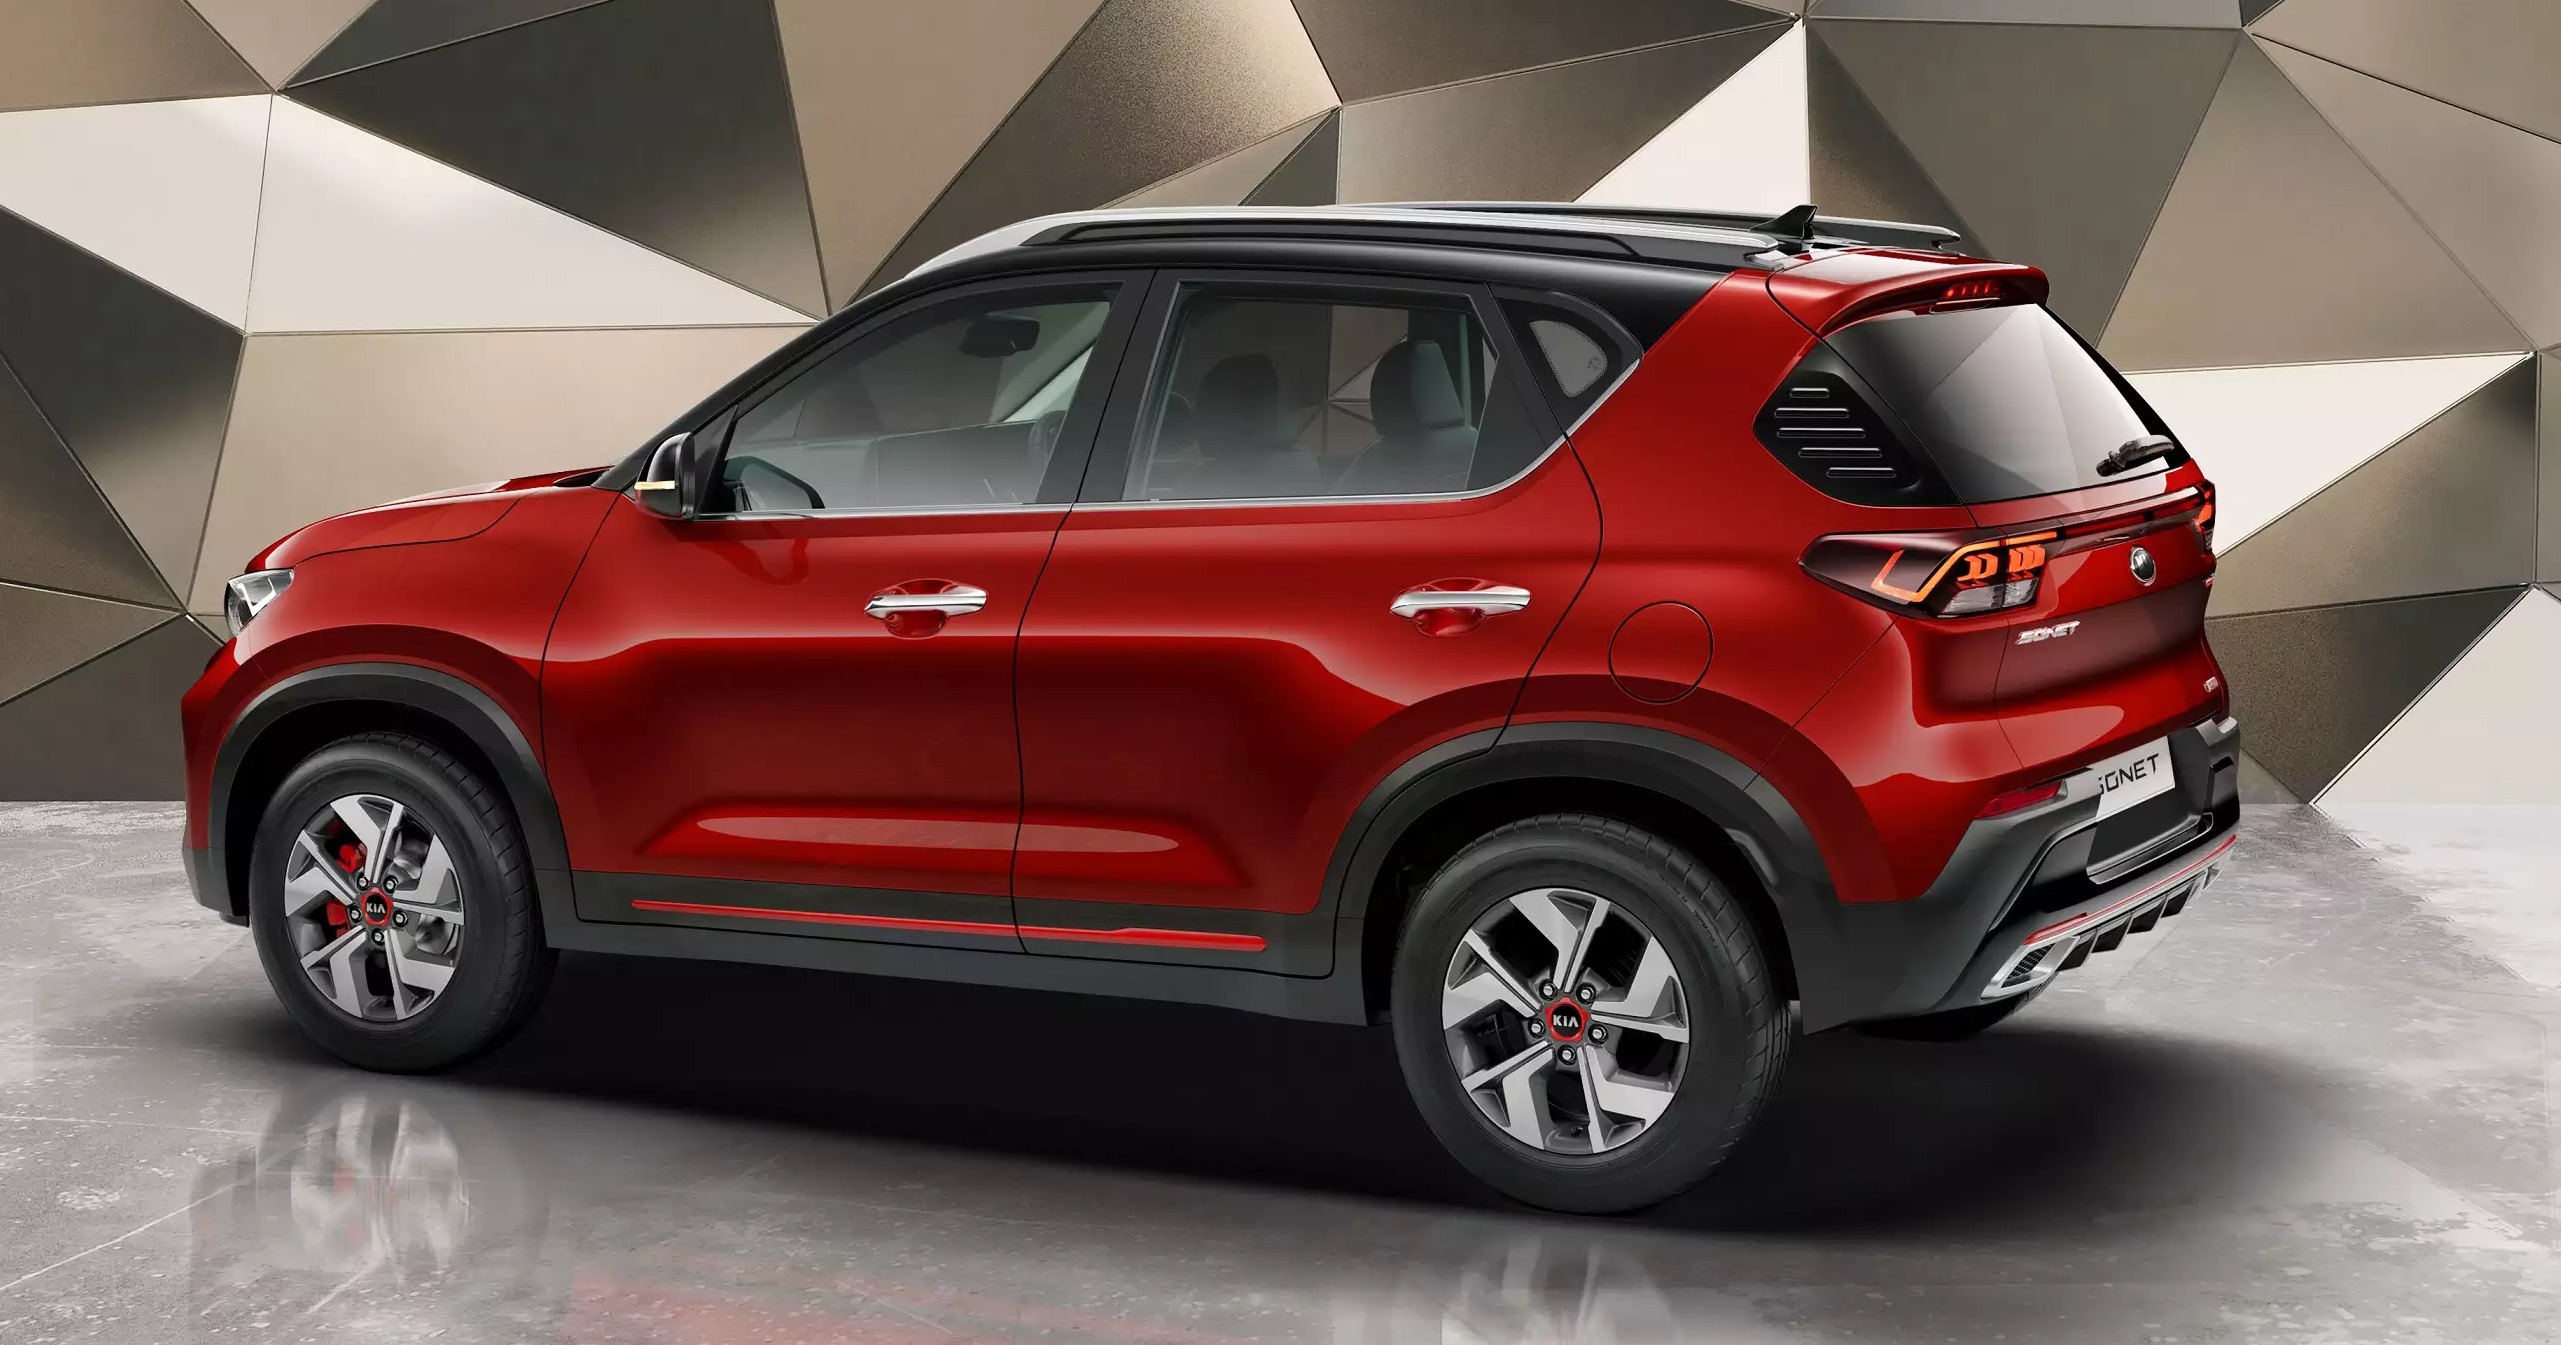 Kia Sonet SUV premiered, to be offered with three engine options